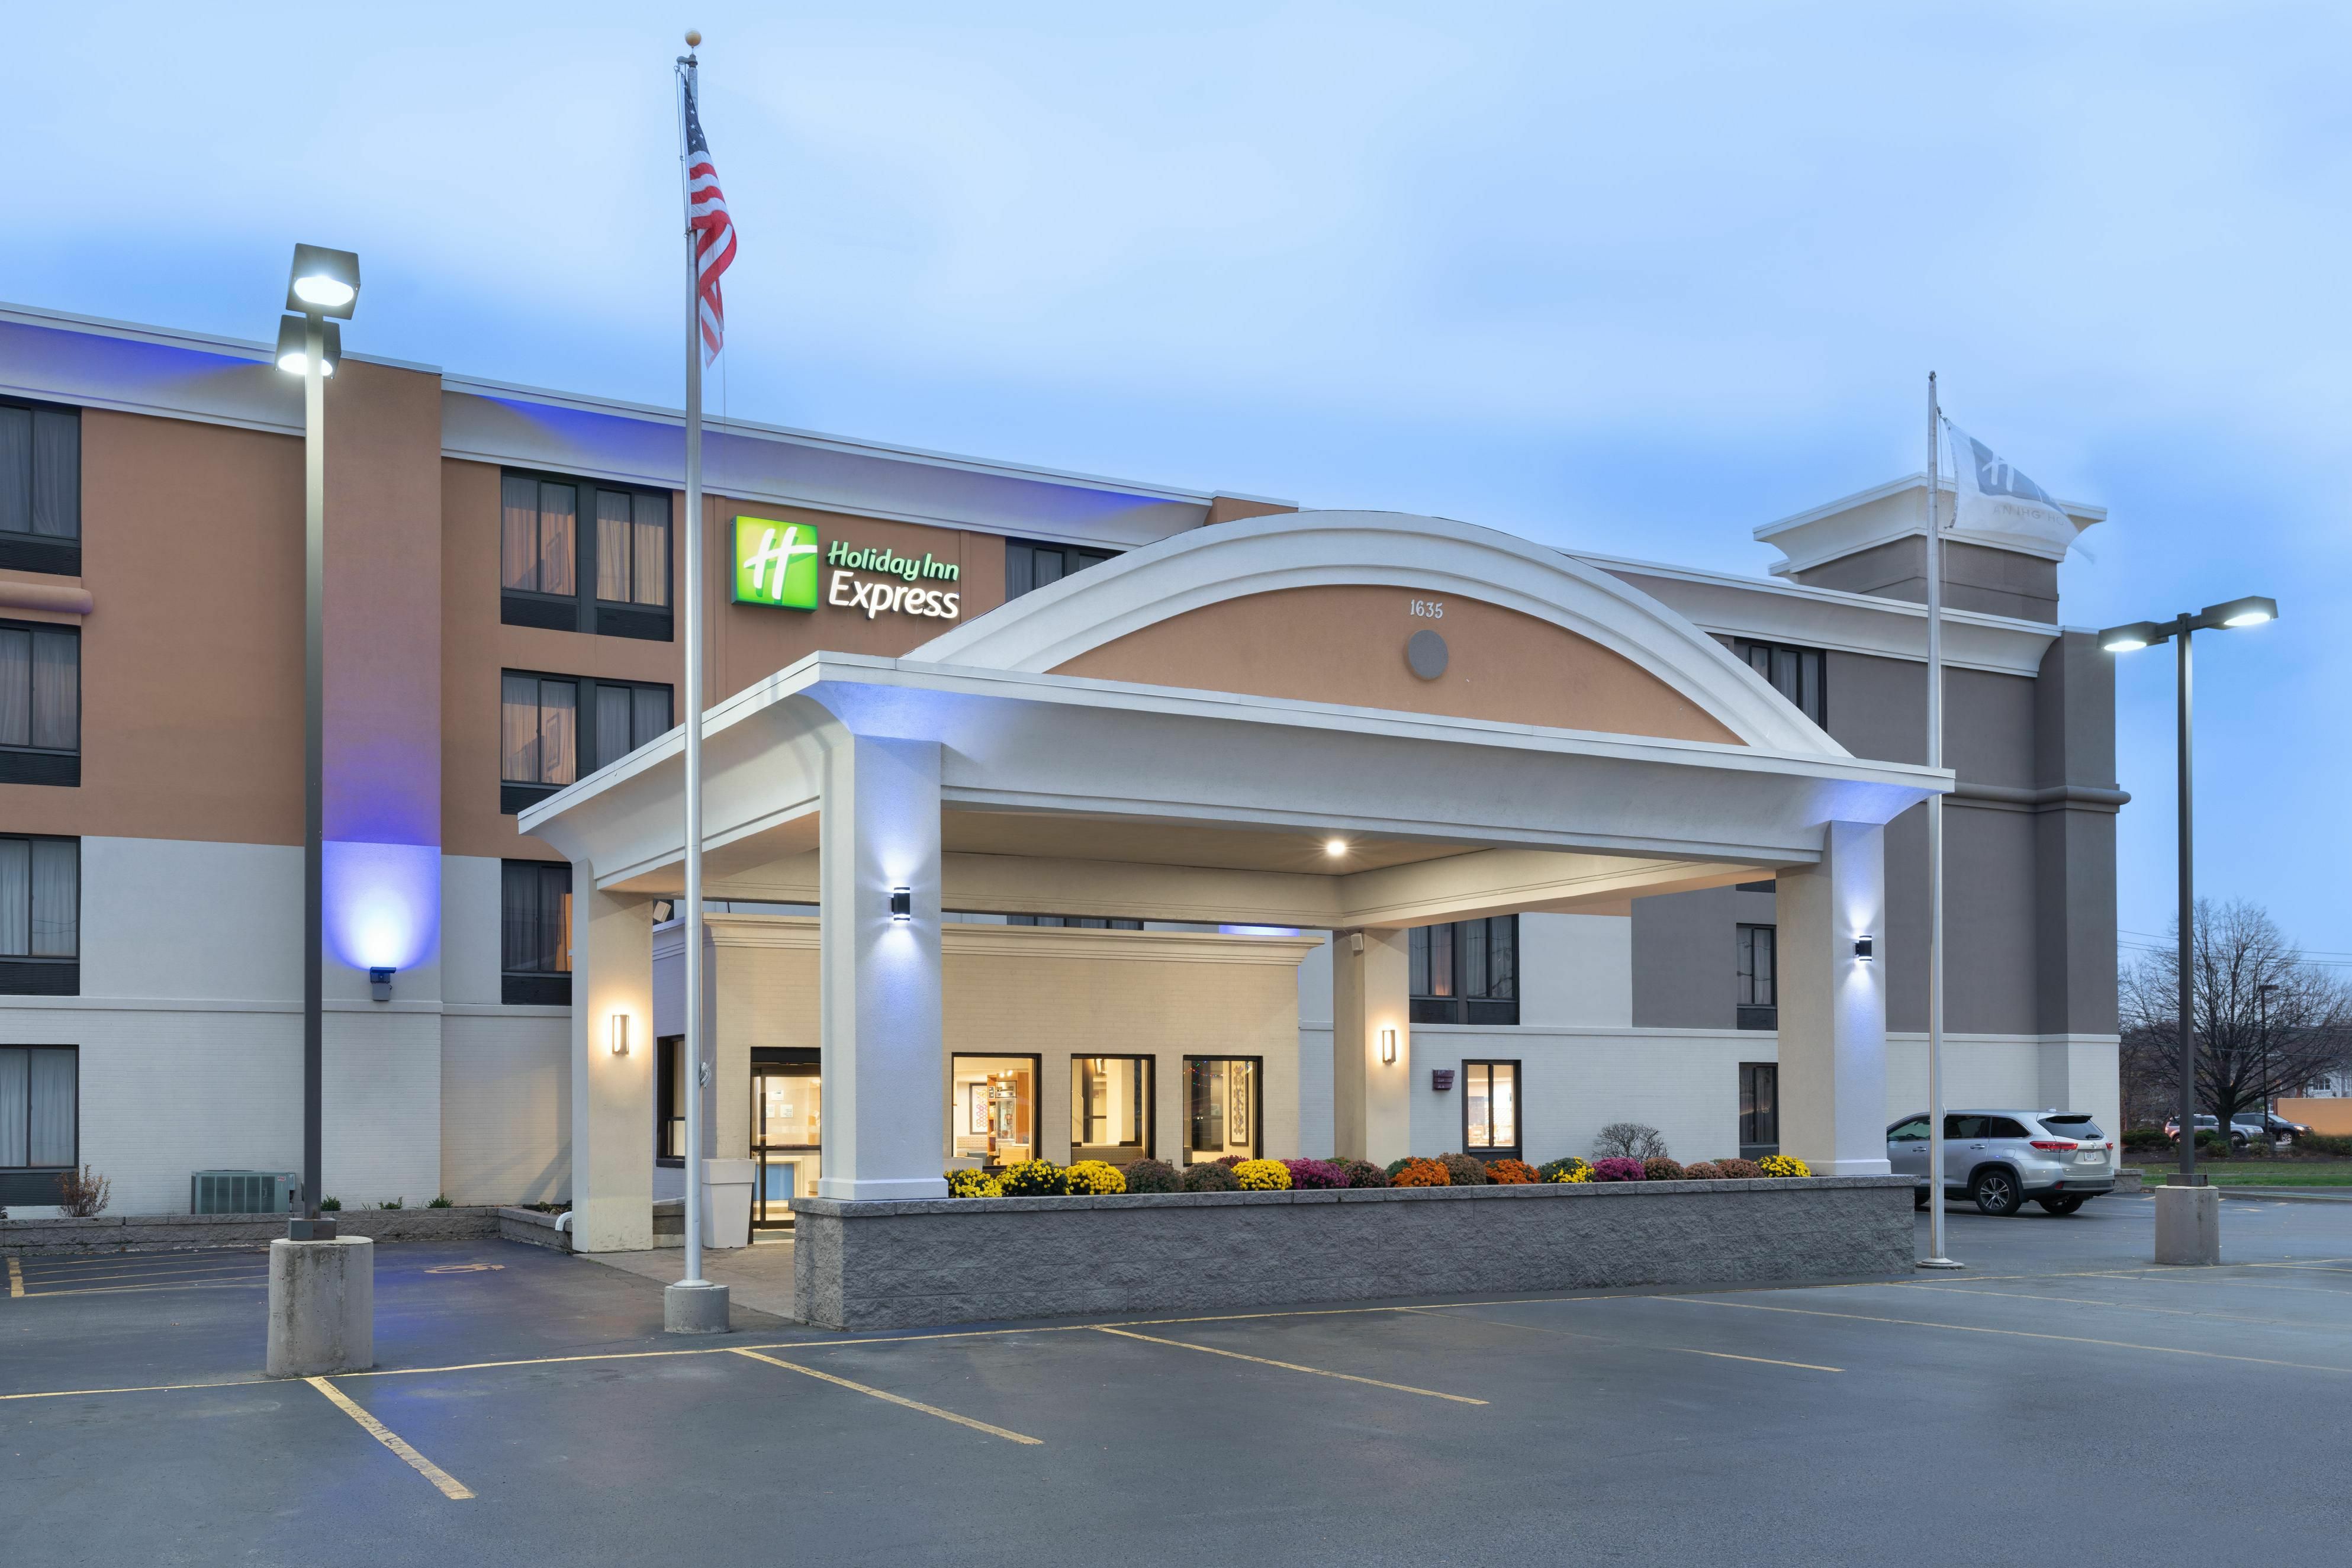 Photo of Holiday Inn Express Rochester - Greece, Rochester, NY